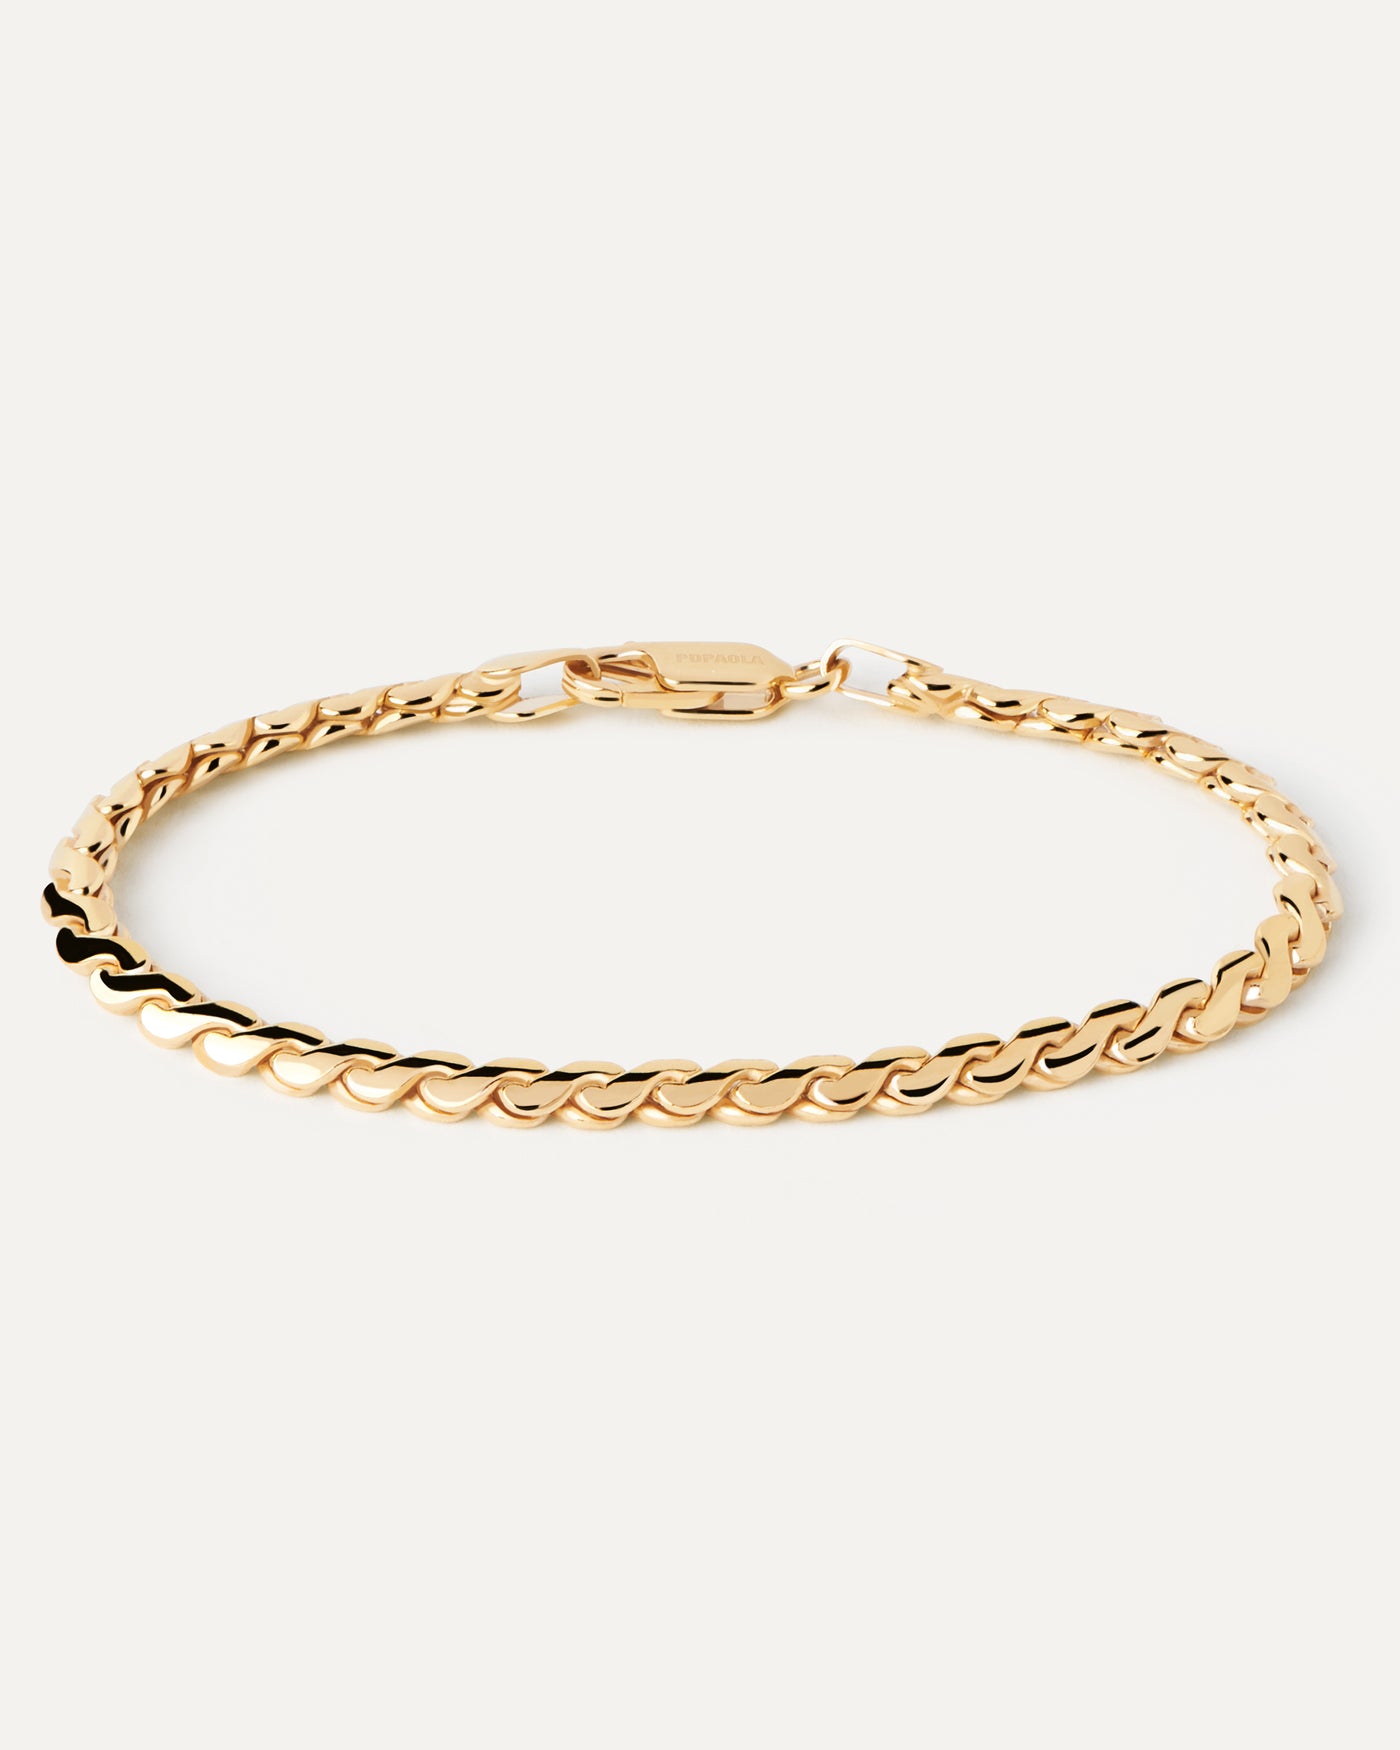 2023 Selection | Large Serpentine Chain Bracelet. Modern gold-plated serpentine thick chain bracelet with braided links. Get the latest arrival from PDPAOLA. Place your order safely and get this Best Seller. Free Shipping.